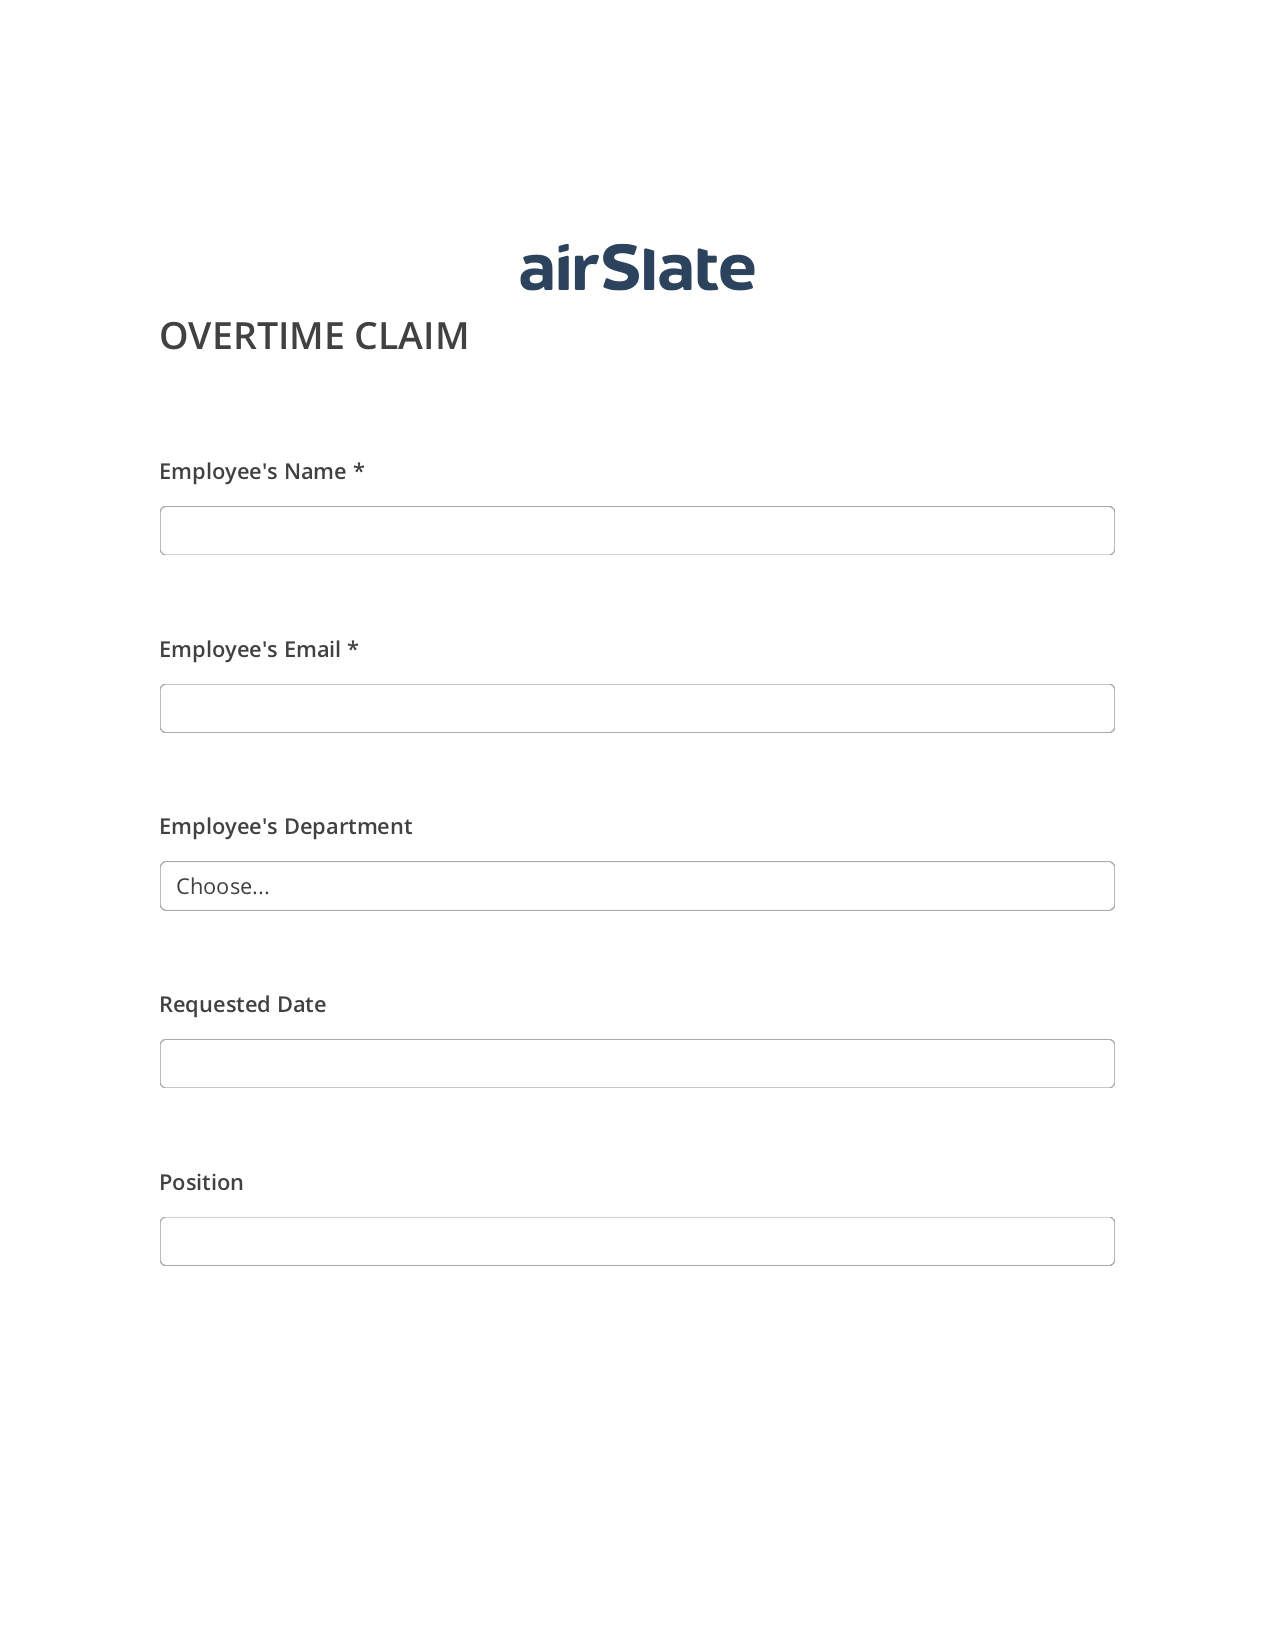 Overtime Claim Flow Add Tags to Slate Bot